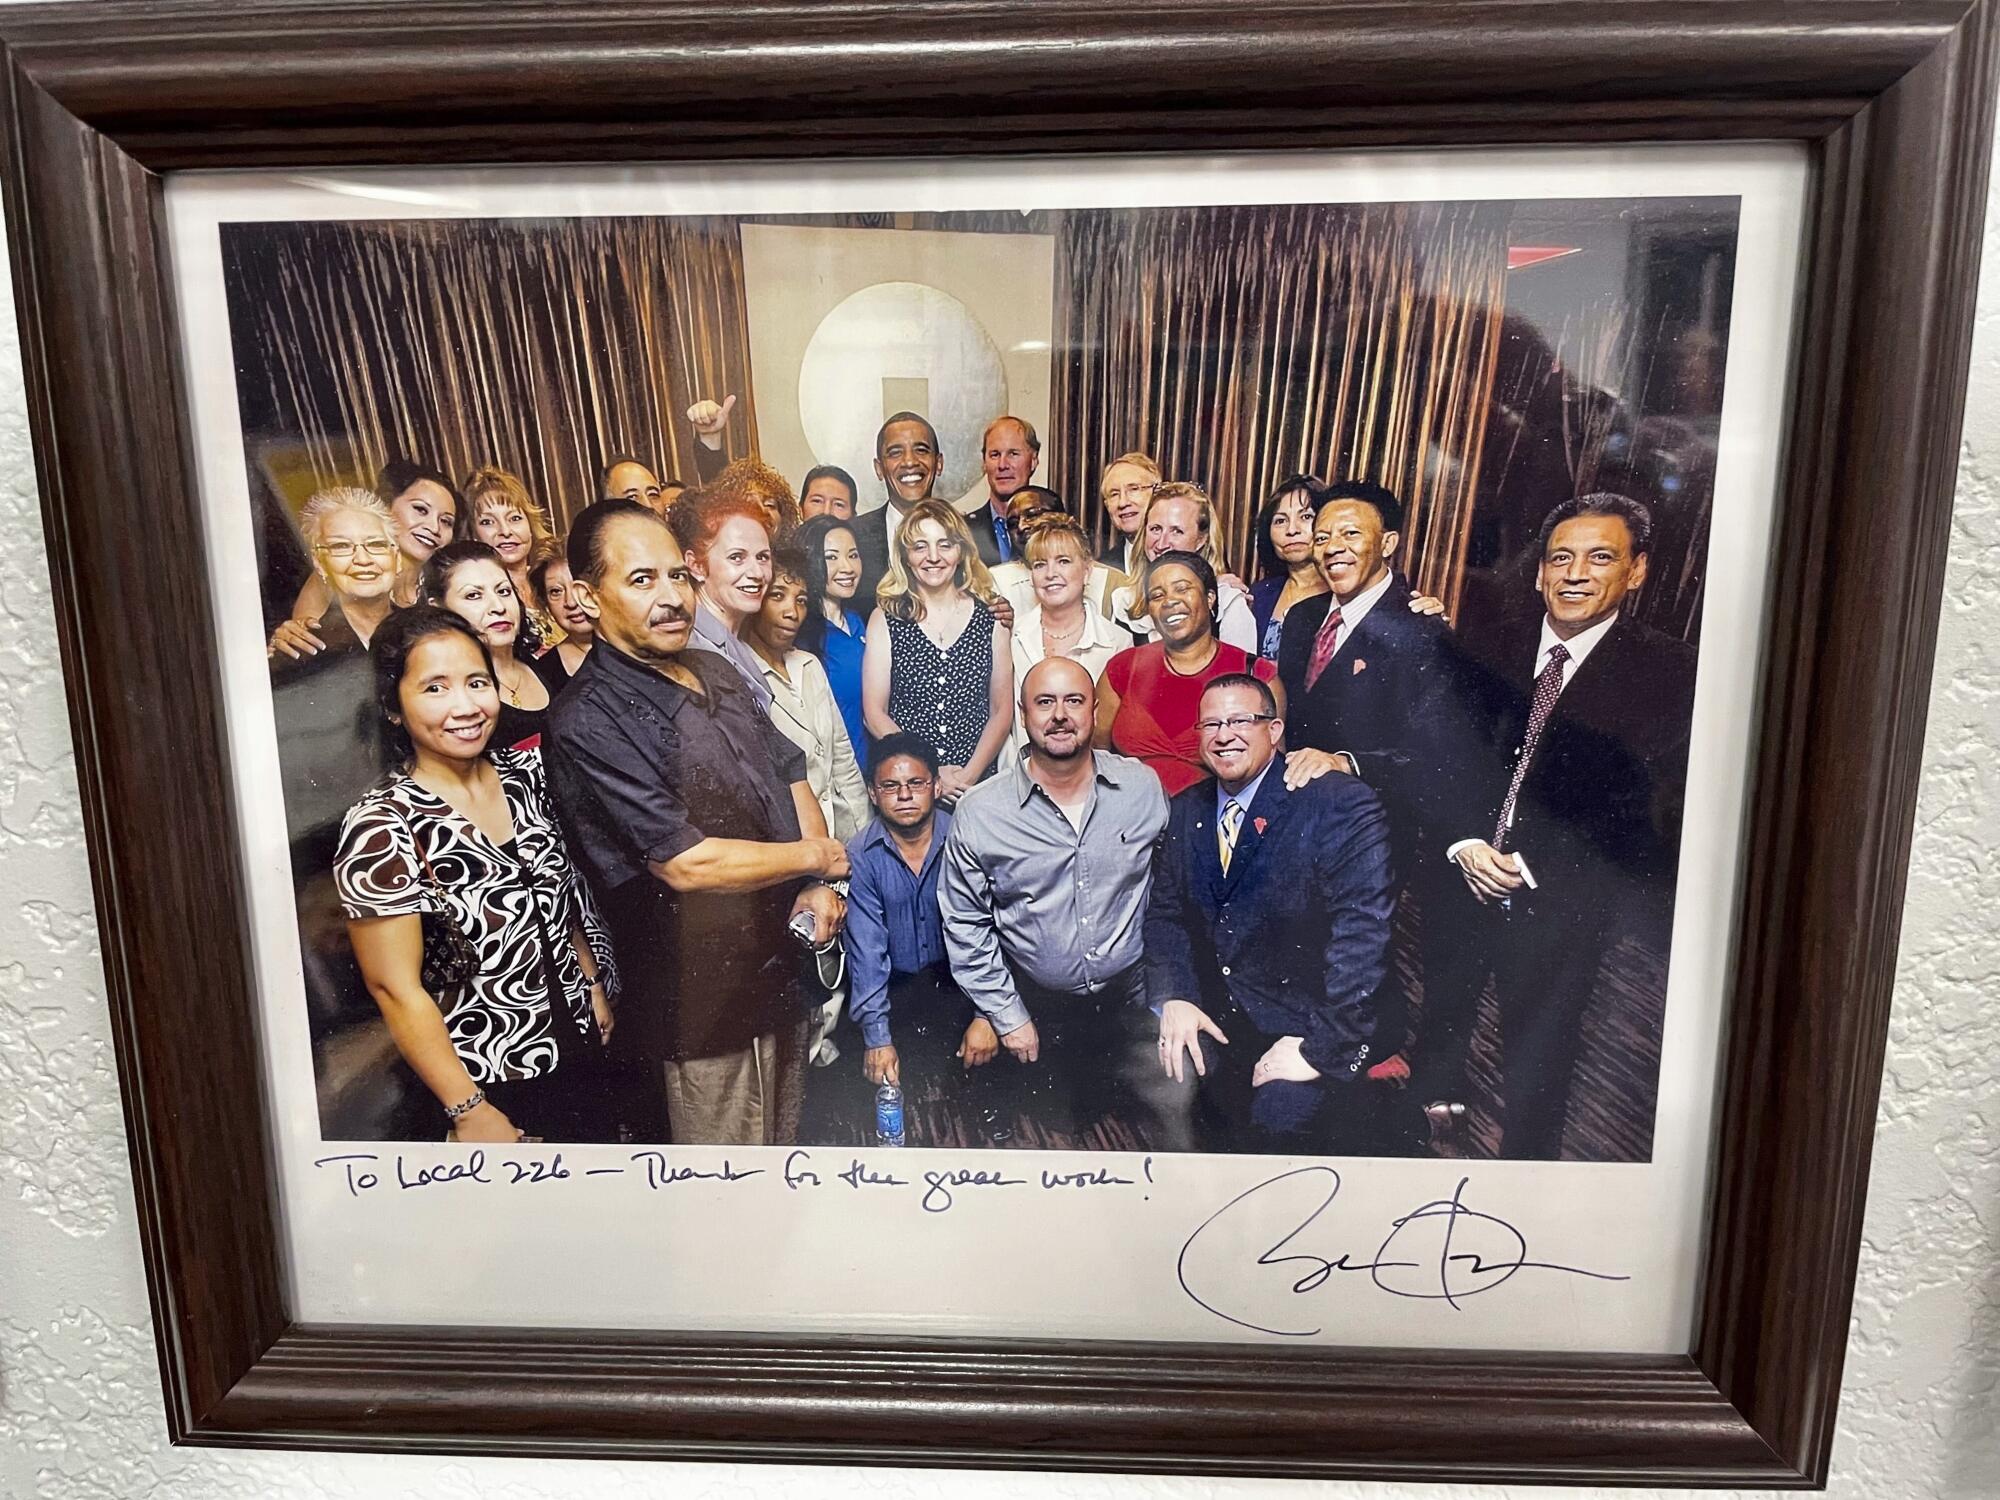 A photo of President Obama and 20-30 people, signed by him with the message: "To Local 226 — thanks for the great work!"